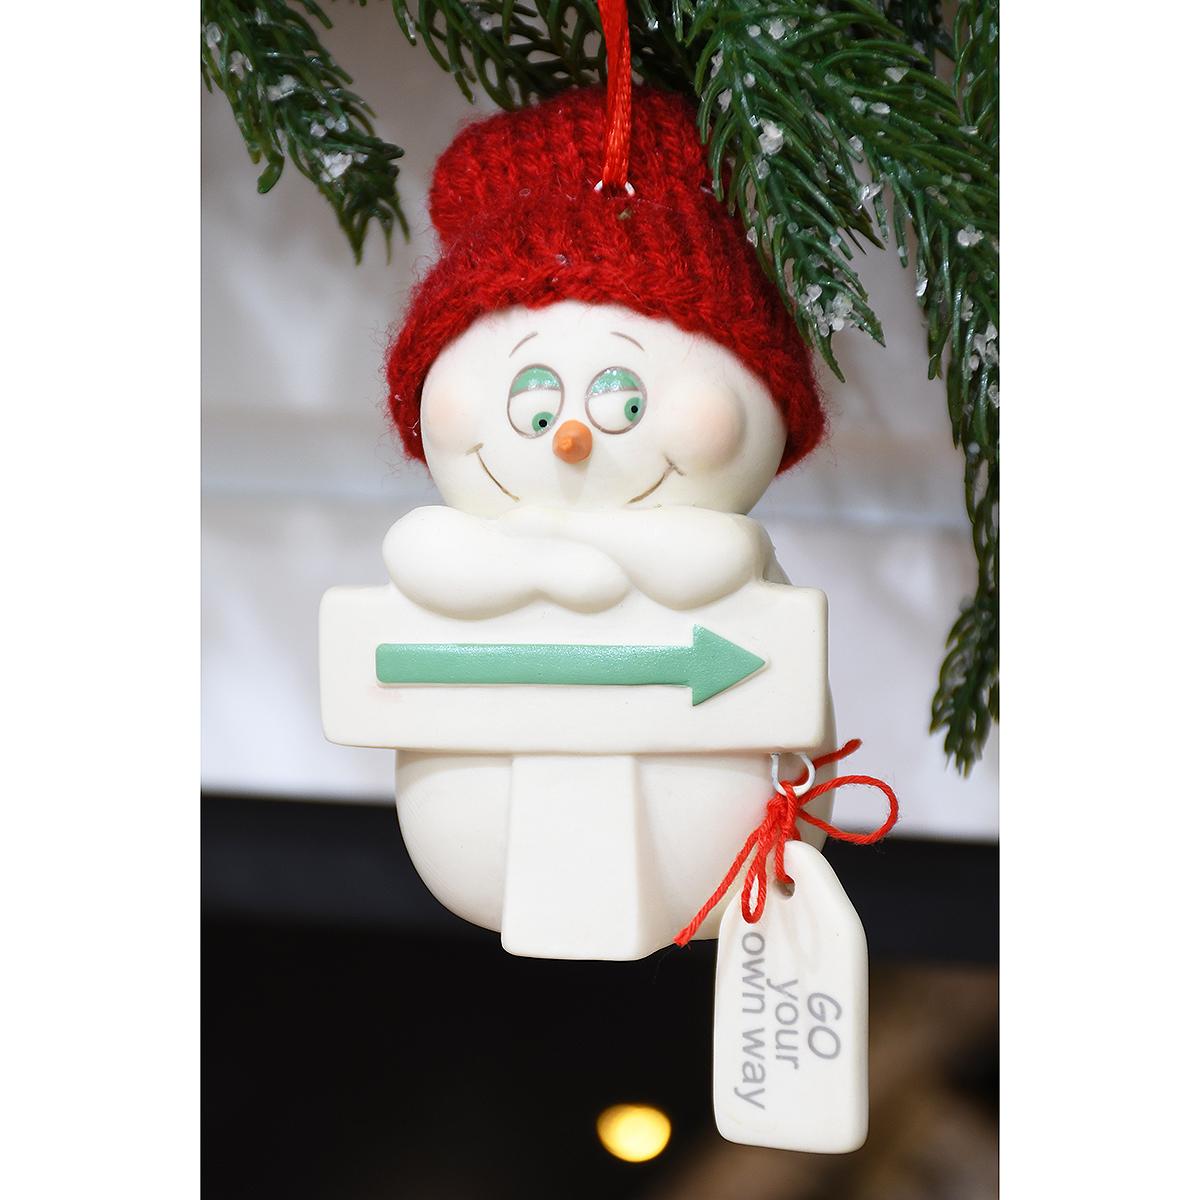 Go Your Own Way Snowpinions Ornament